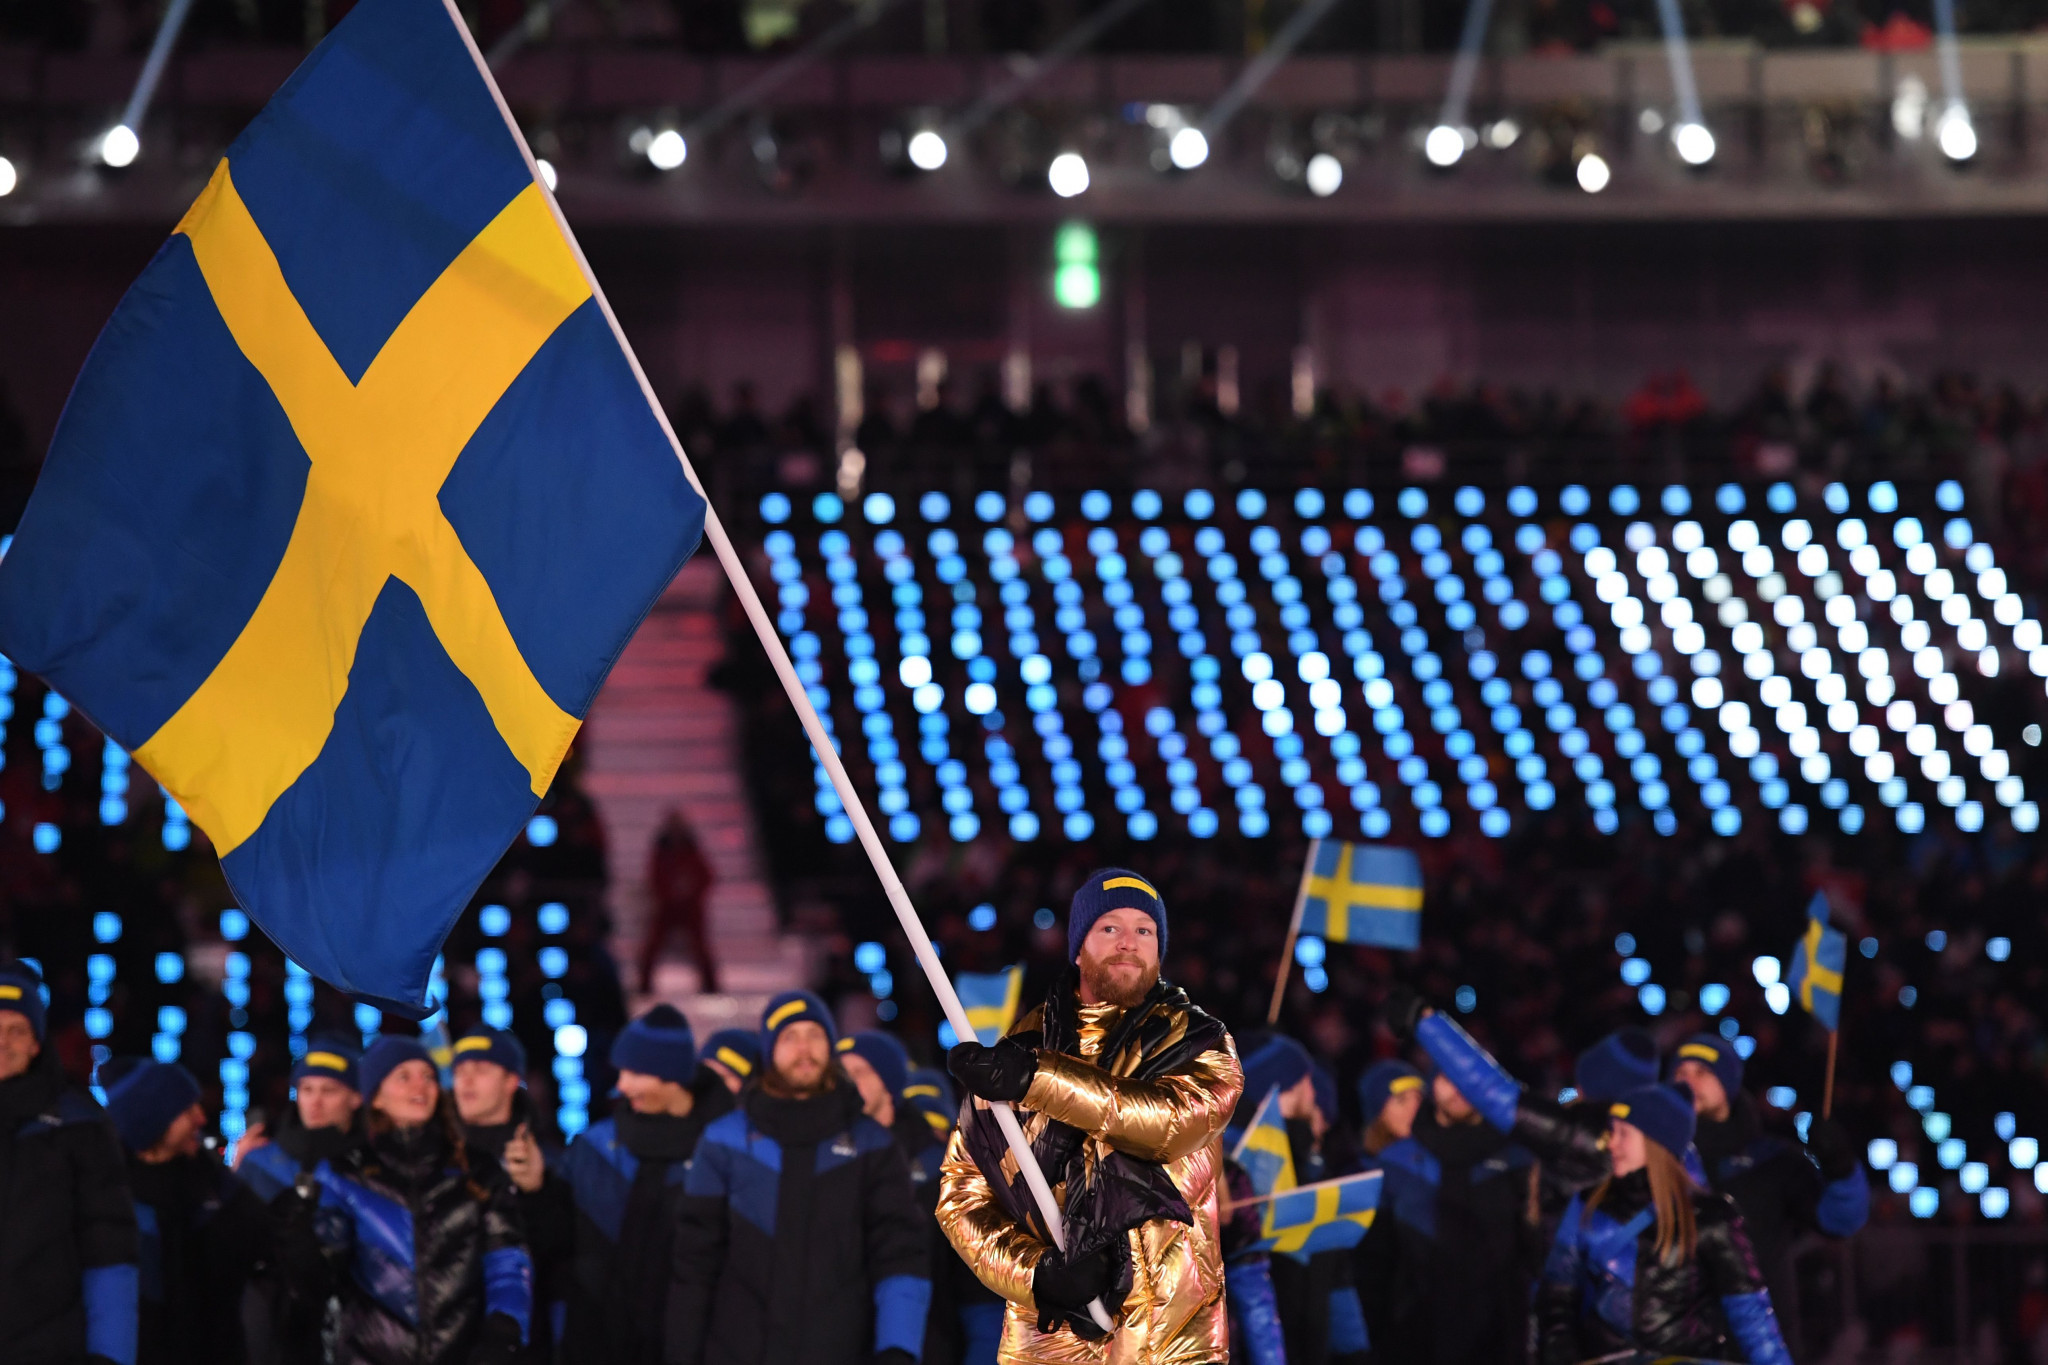 Sweden NOC and Swedish Armed Forces collaborate prior to Beijing 2022